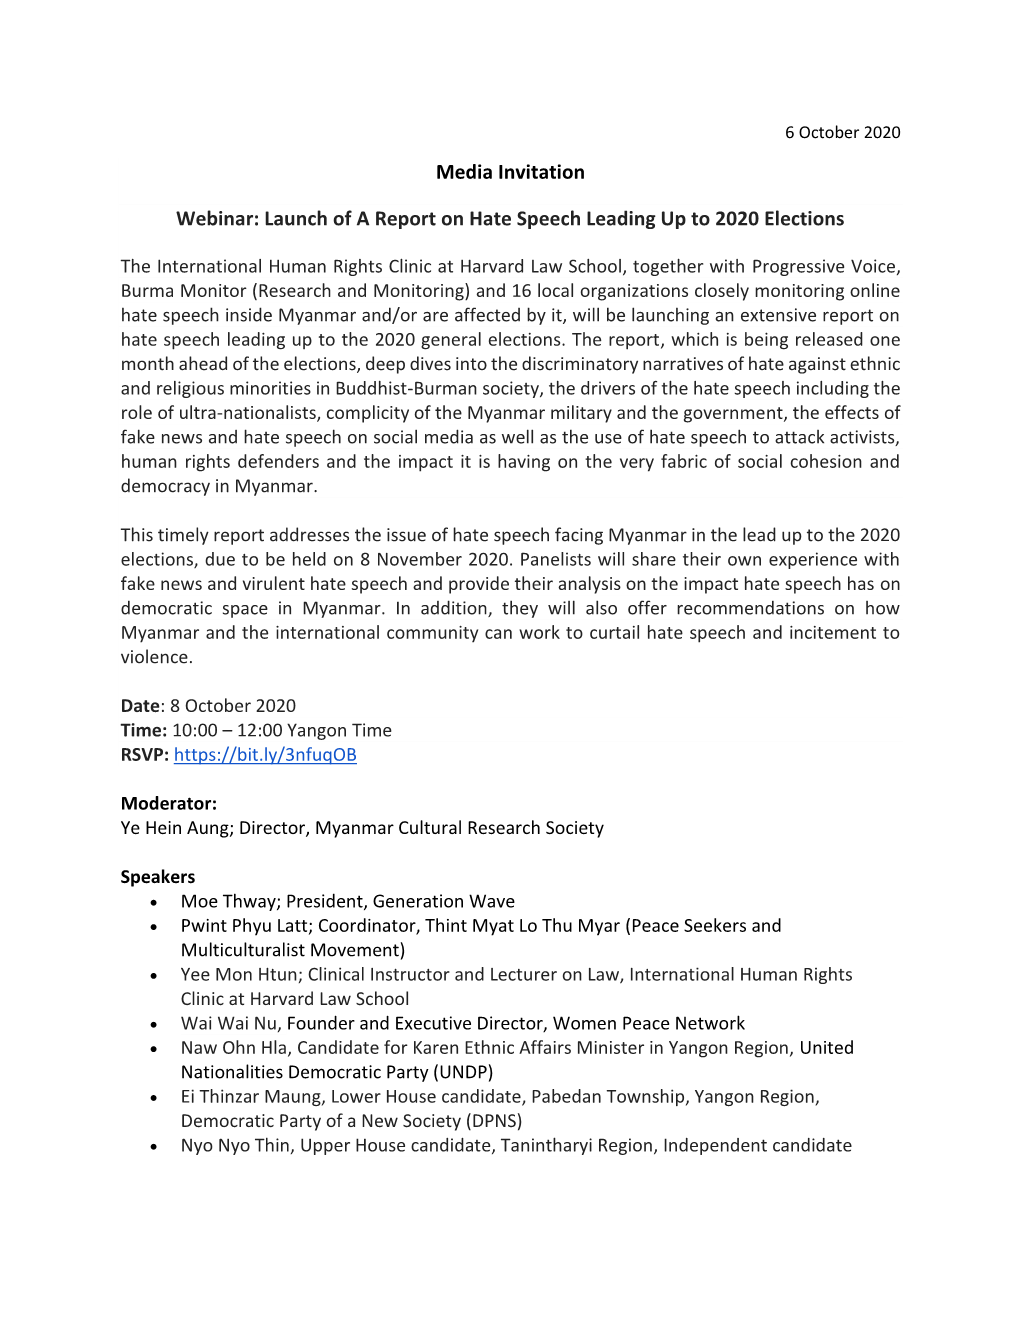 Media Invitation Webinar: Launch of a Report on Hate Speech Leading Up